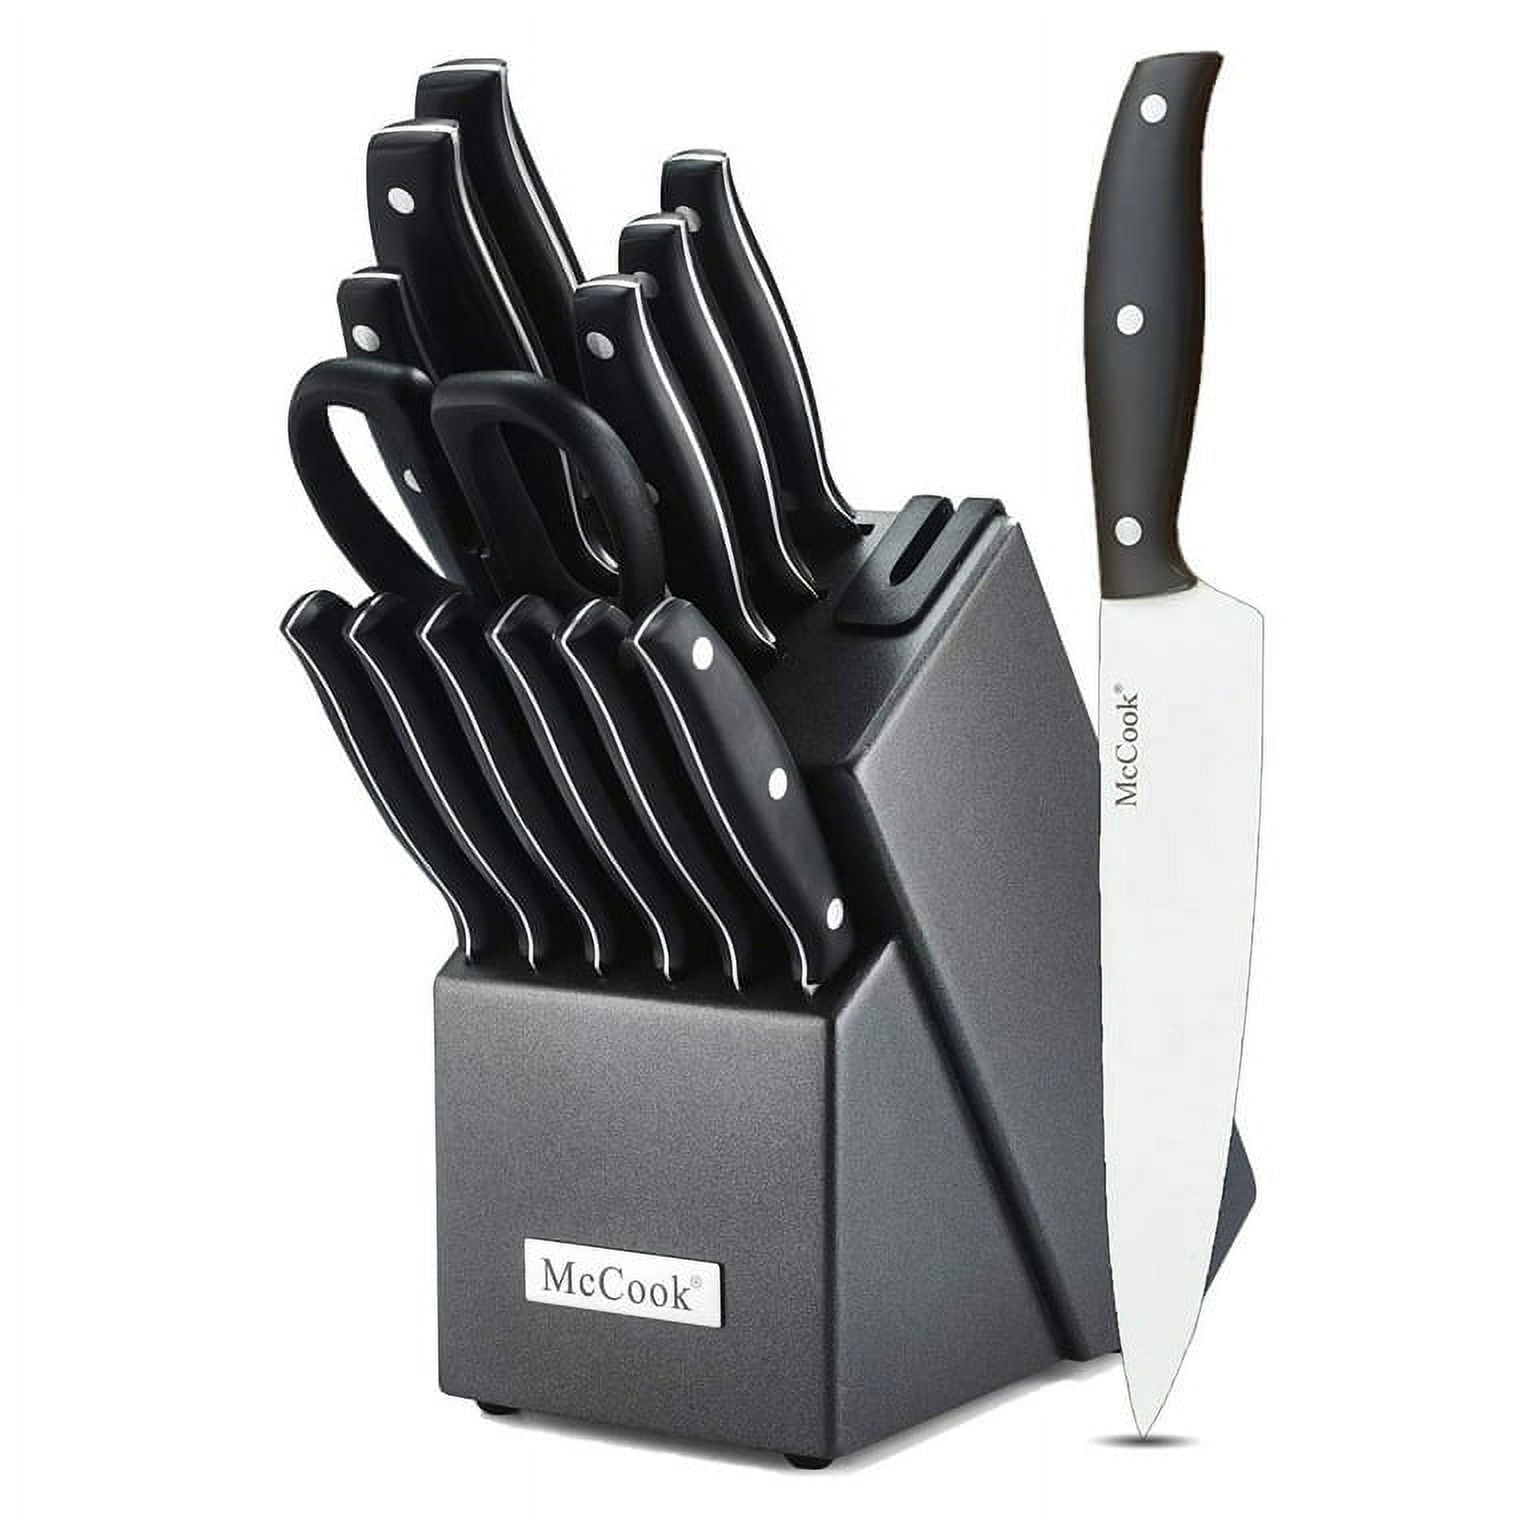 Mr.Cook 3 Pc Stainless Steel Knife Set Price in India - Buy Mr.Cook 3 Pc  Stainless Steel Knife Set online at